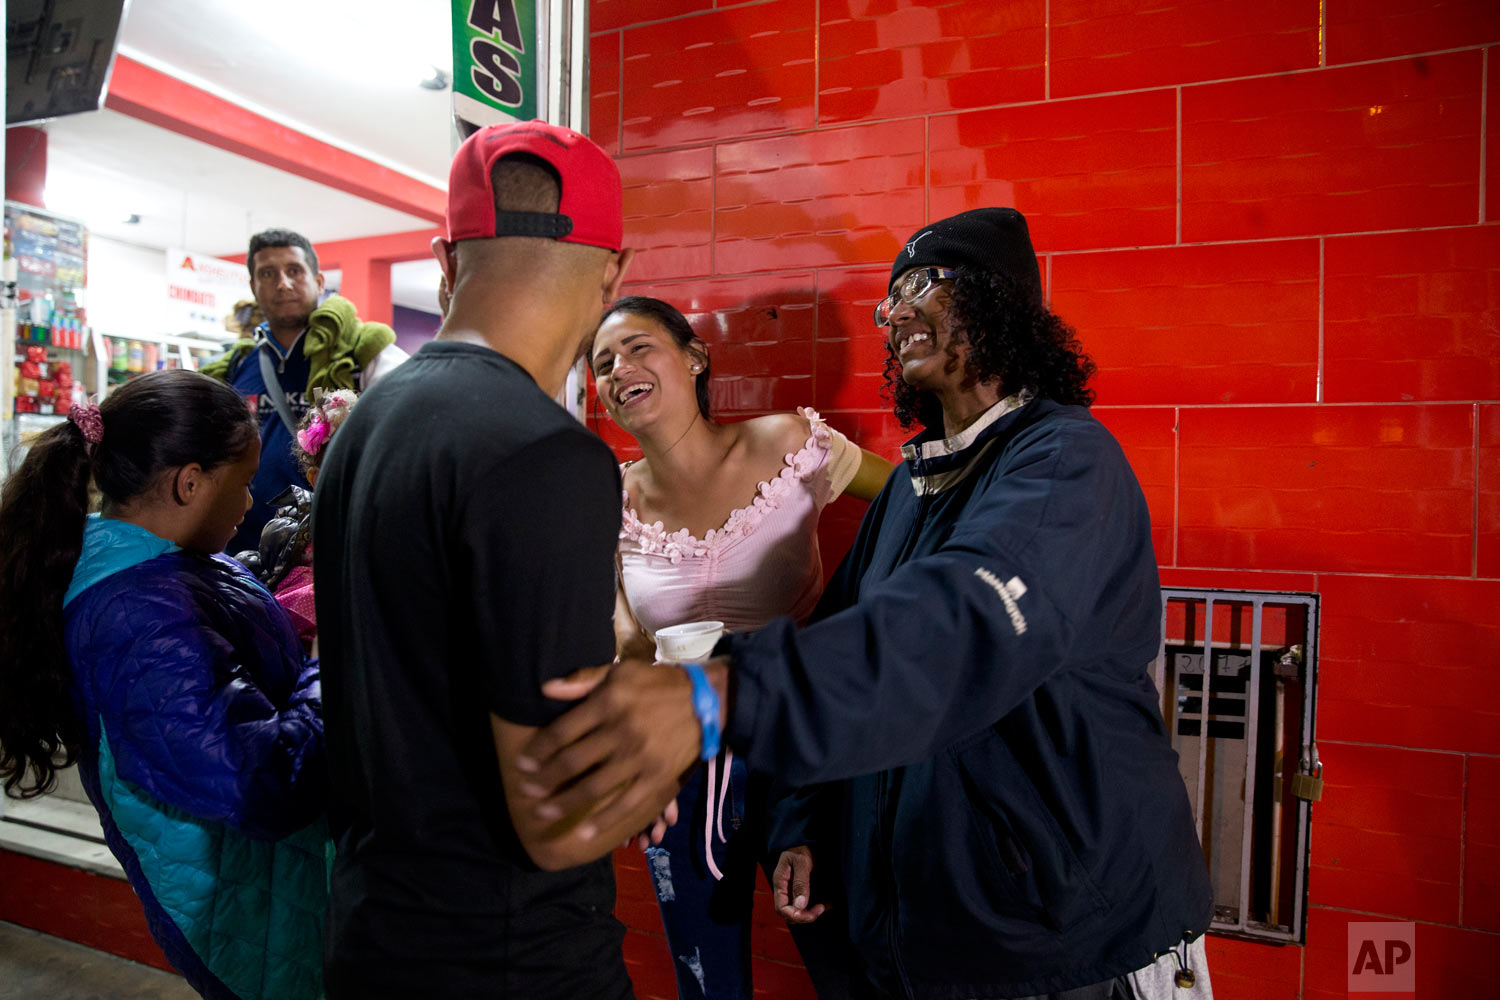  In this Sept. 8, 2018 photo, Sandra Cadiz, right, smiles as she reunites with her son Leonardo, front left, and her daughter-in-law Daniela Gomez, as she and her 10-year-old daughter Angelis, far left, arrive to the bus station in Lima, Peru, after 